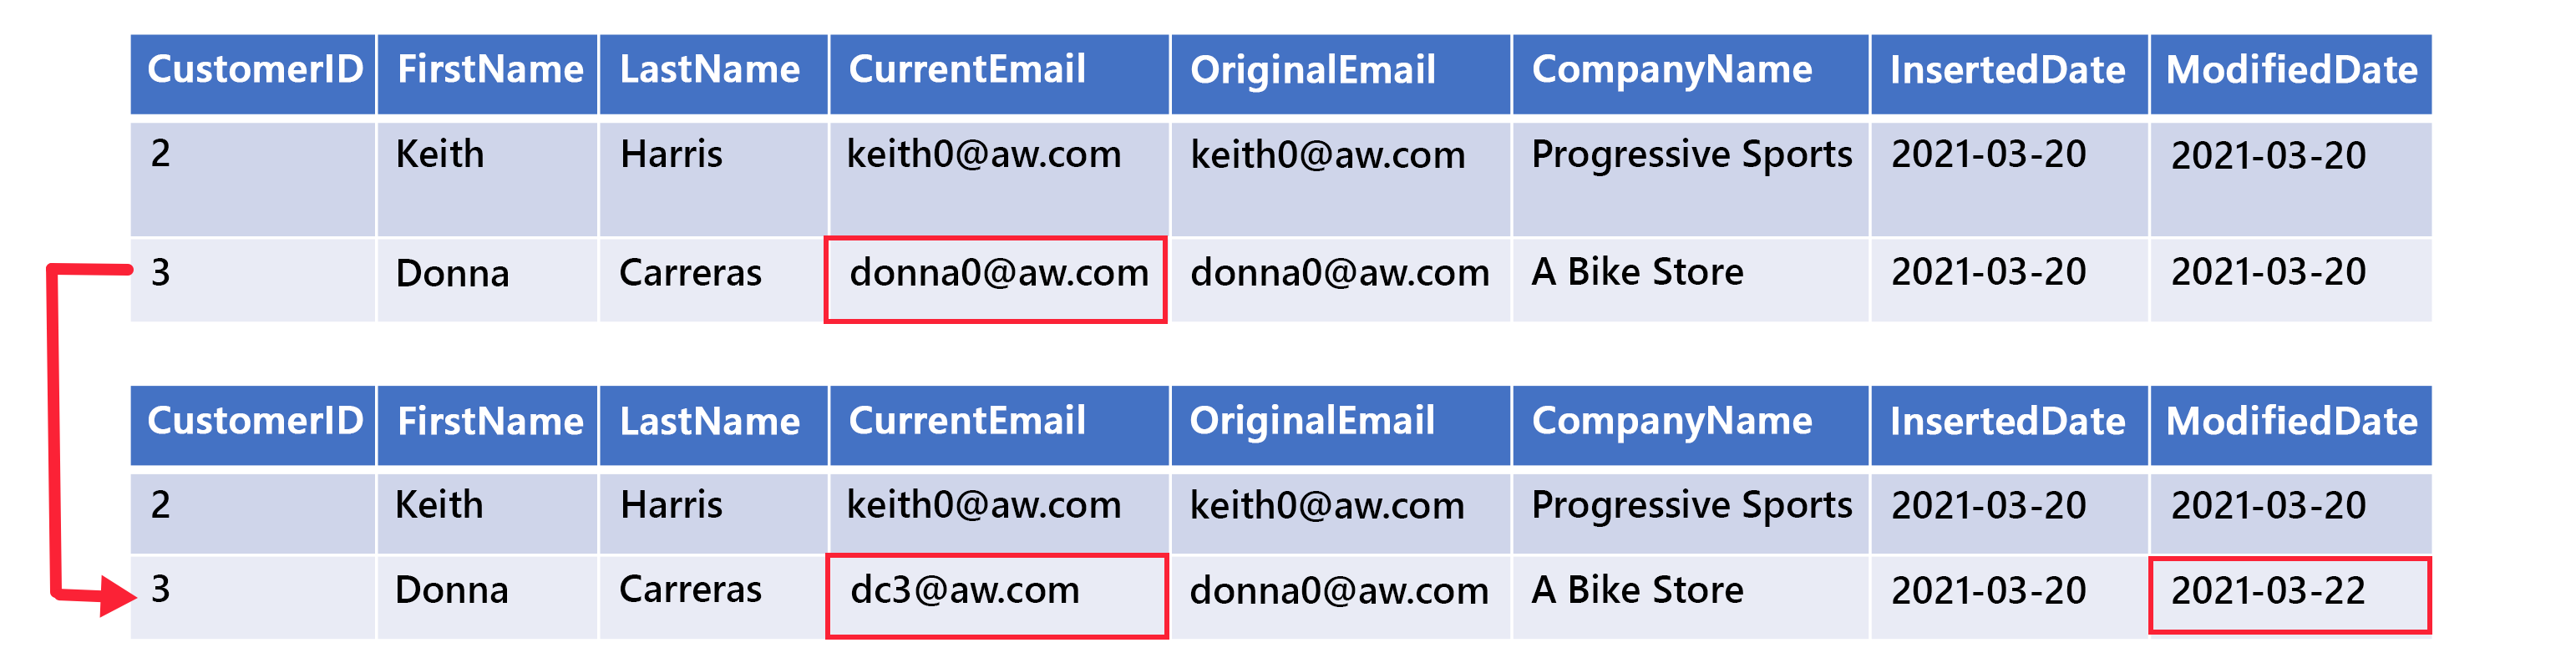 An example Type 3 SCD row that shows an updated CurrentEmail column and an unchanged OriginalEmail column.